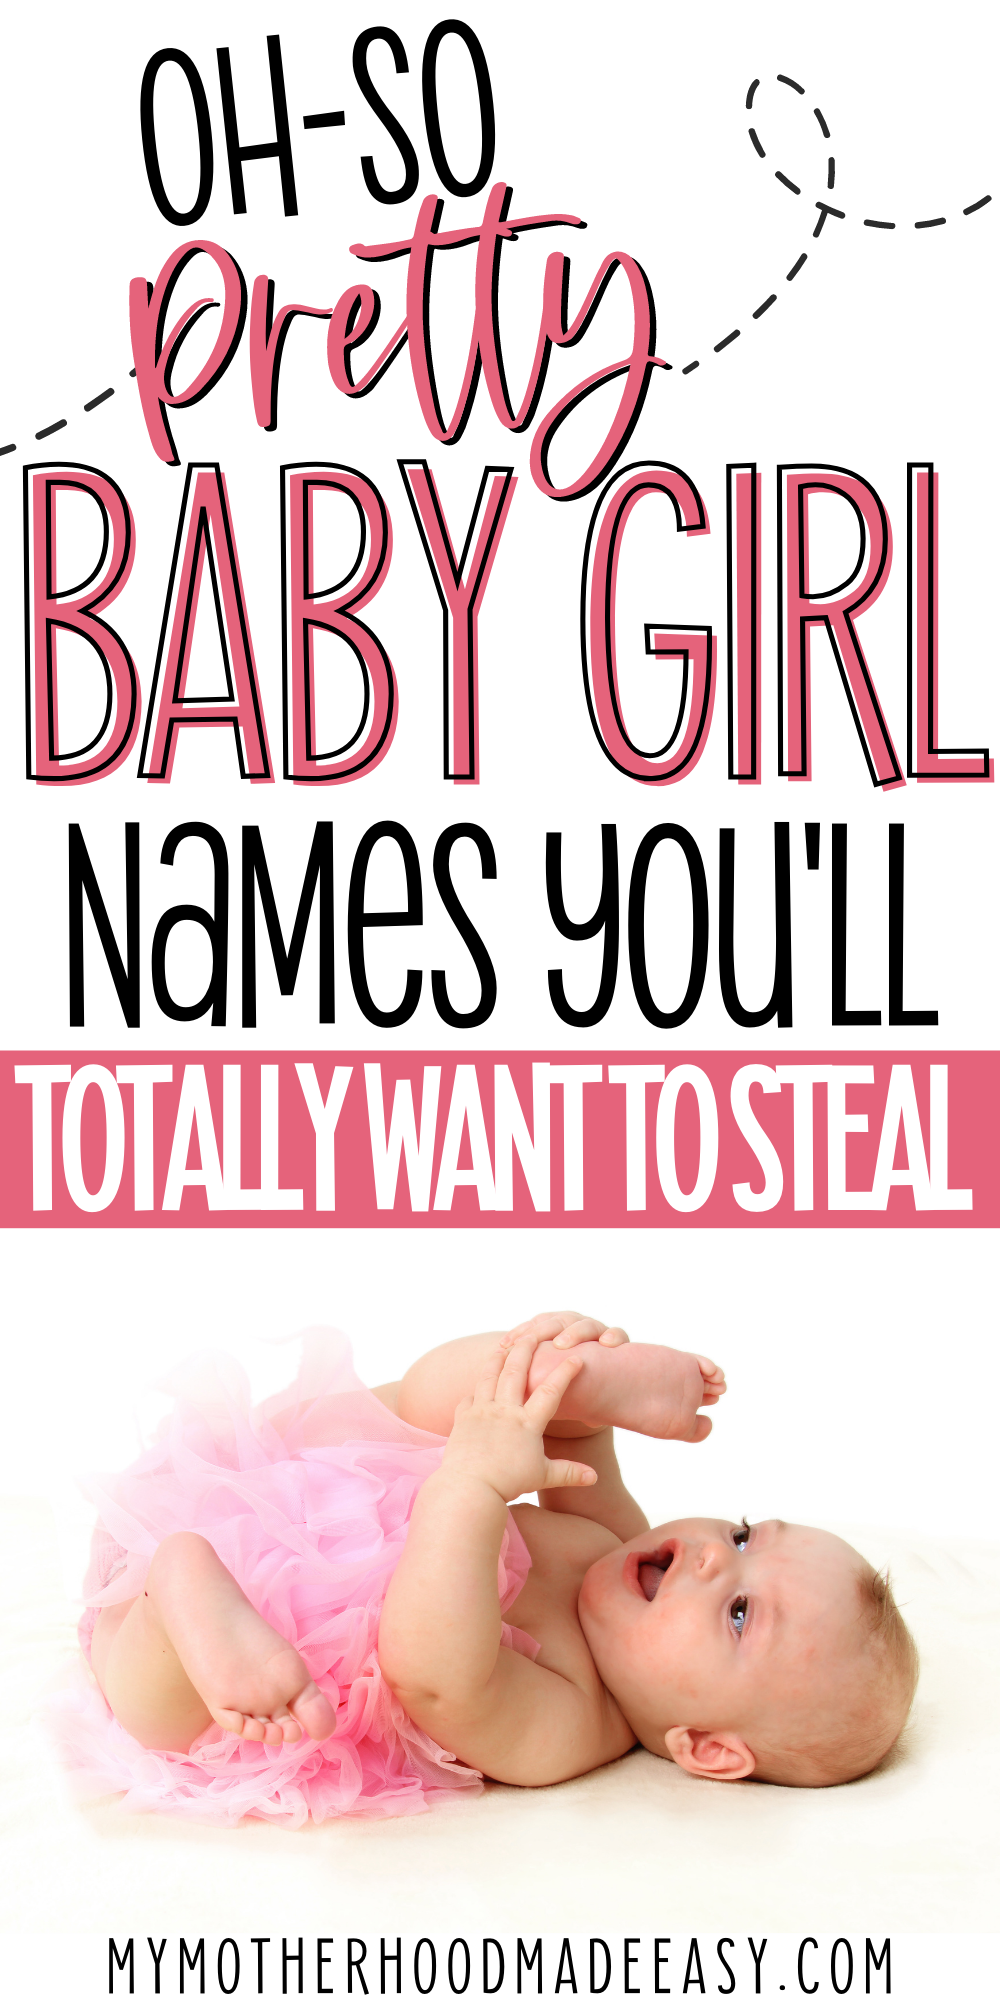 Looking for the perfect Pretty baby Girl name to give to your new blessing coming soon? Here is a list of 100+ Pretty babyGirl names to choose from! Read more. girl names pretty girl names Pretty baby Girl names baby girl names 2020 Beautiful baby girl name Top baby girl names Top pretty baby girl names